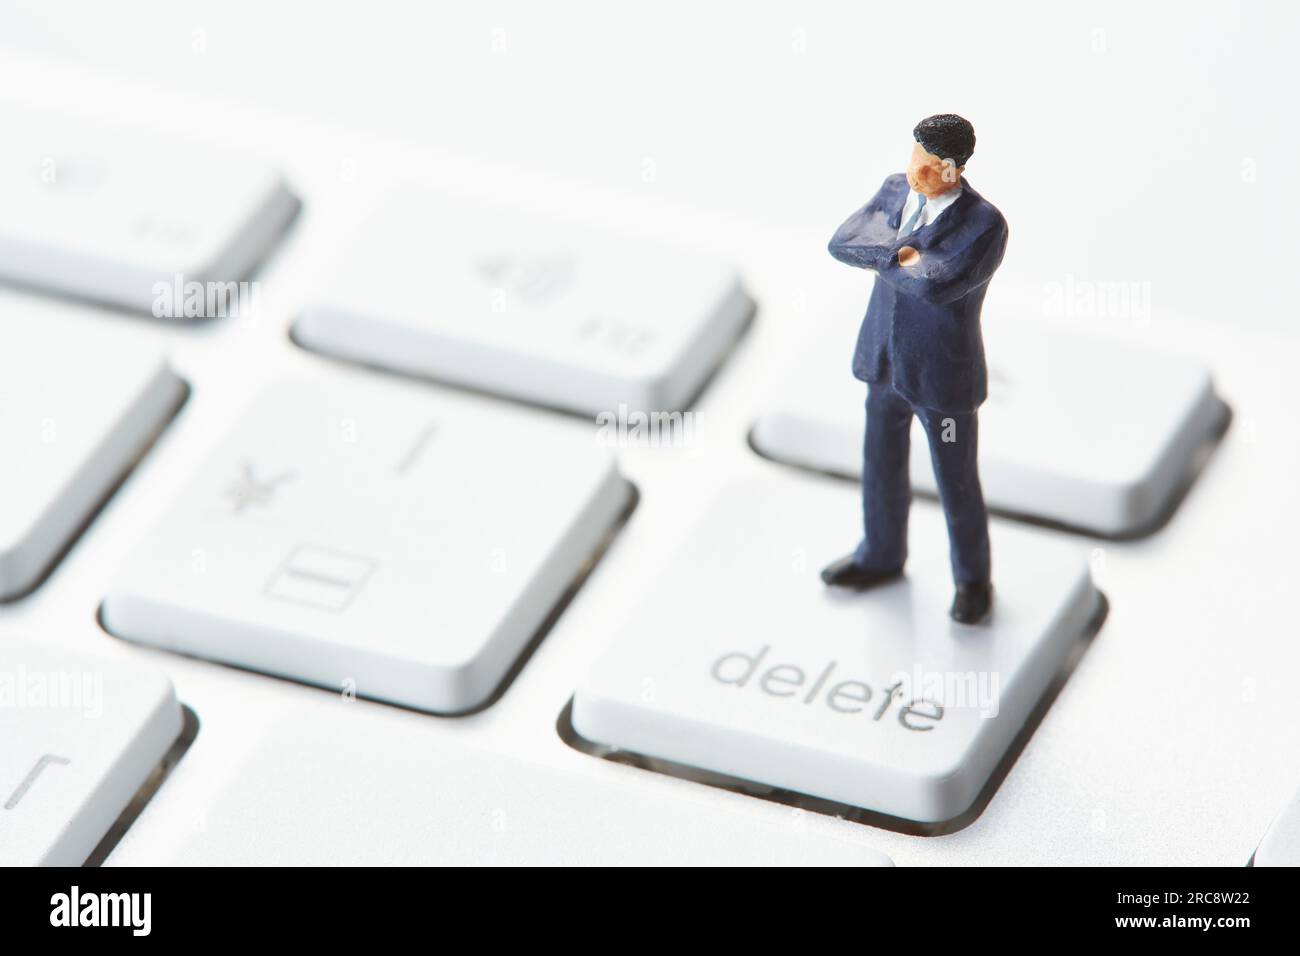 Miniature doll crossing arms on keyboard Stock Photo